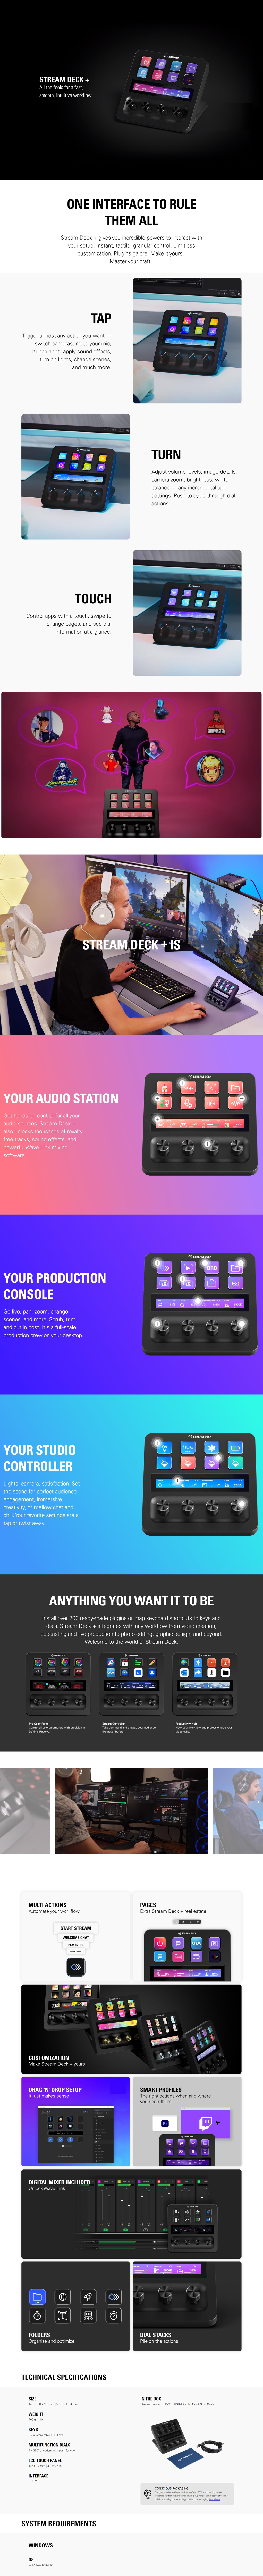 A large marketing image providing additional information about the product Elgato Stream Deck + - Black - Additional alt info not provided